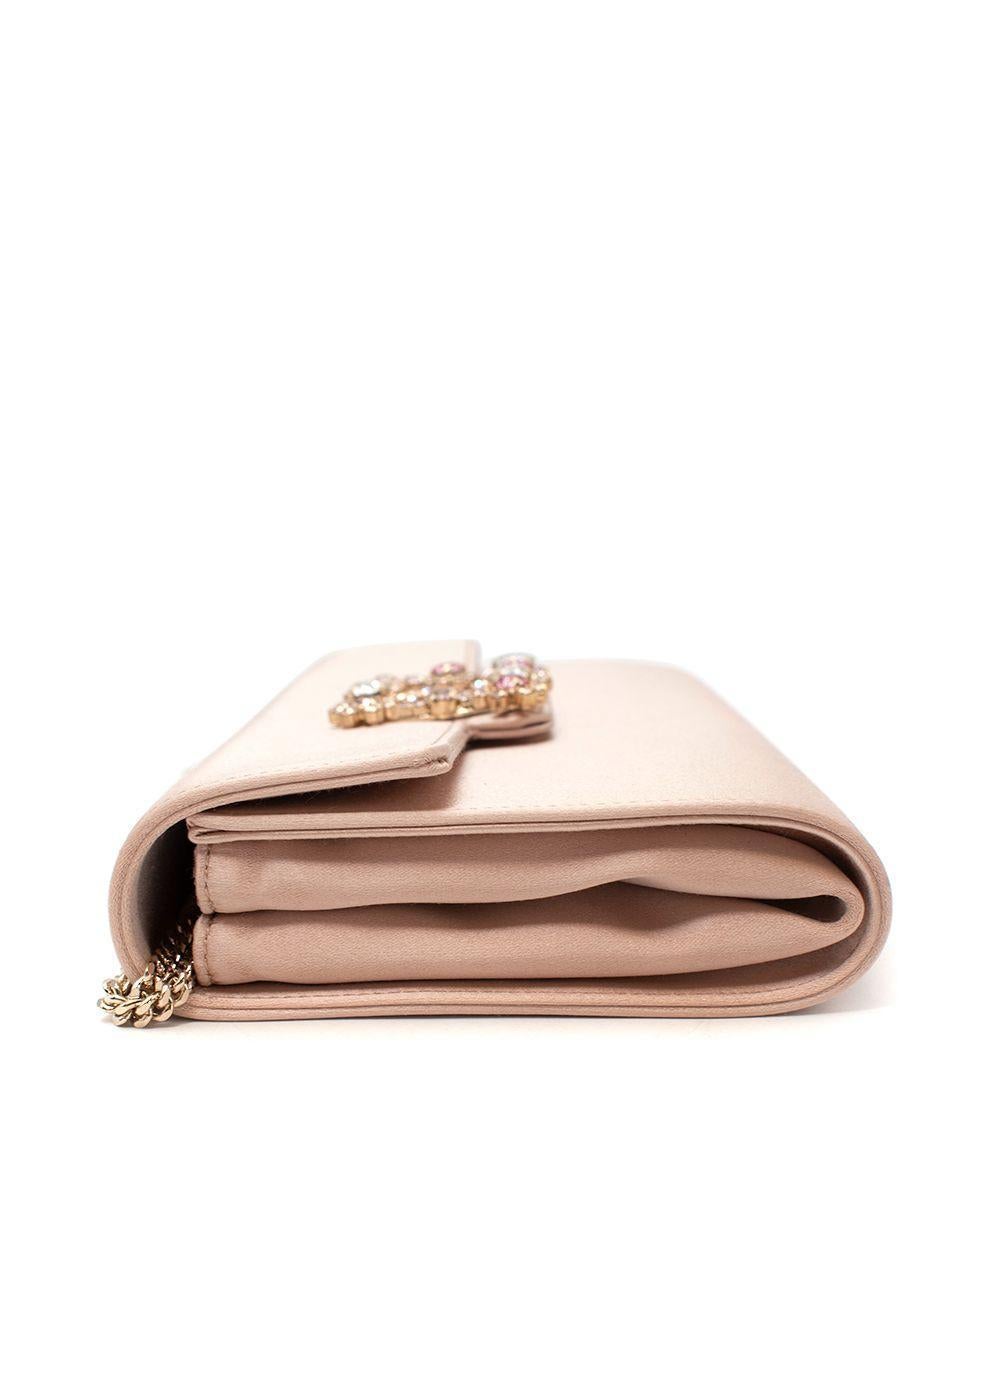 Roger Vivier Nude-Pink Satin Flower Strass Chain Clutch For Sale 1